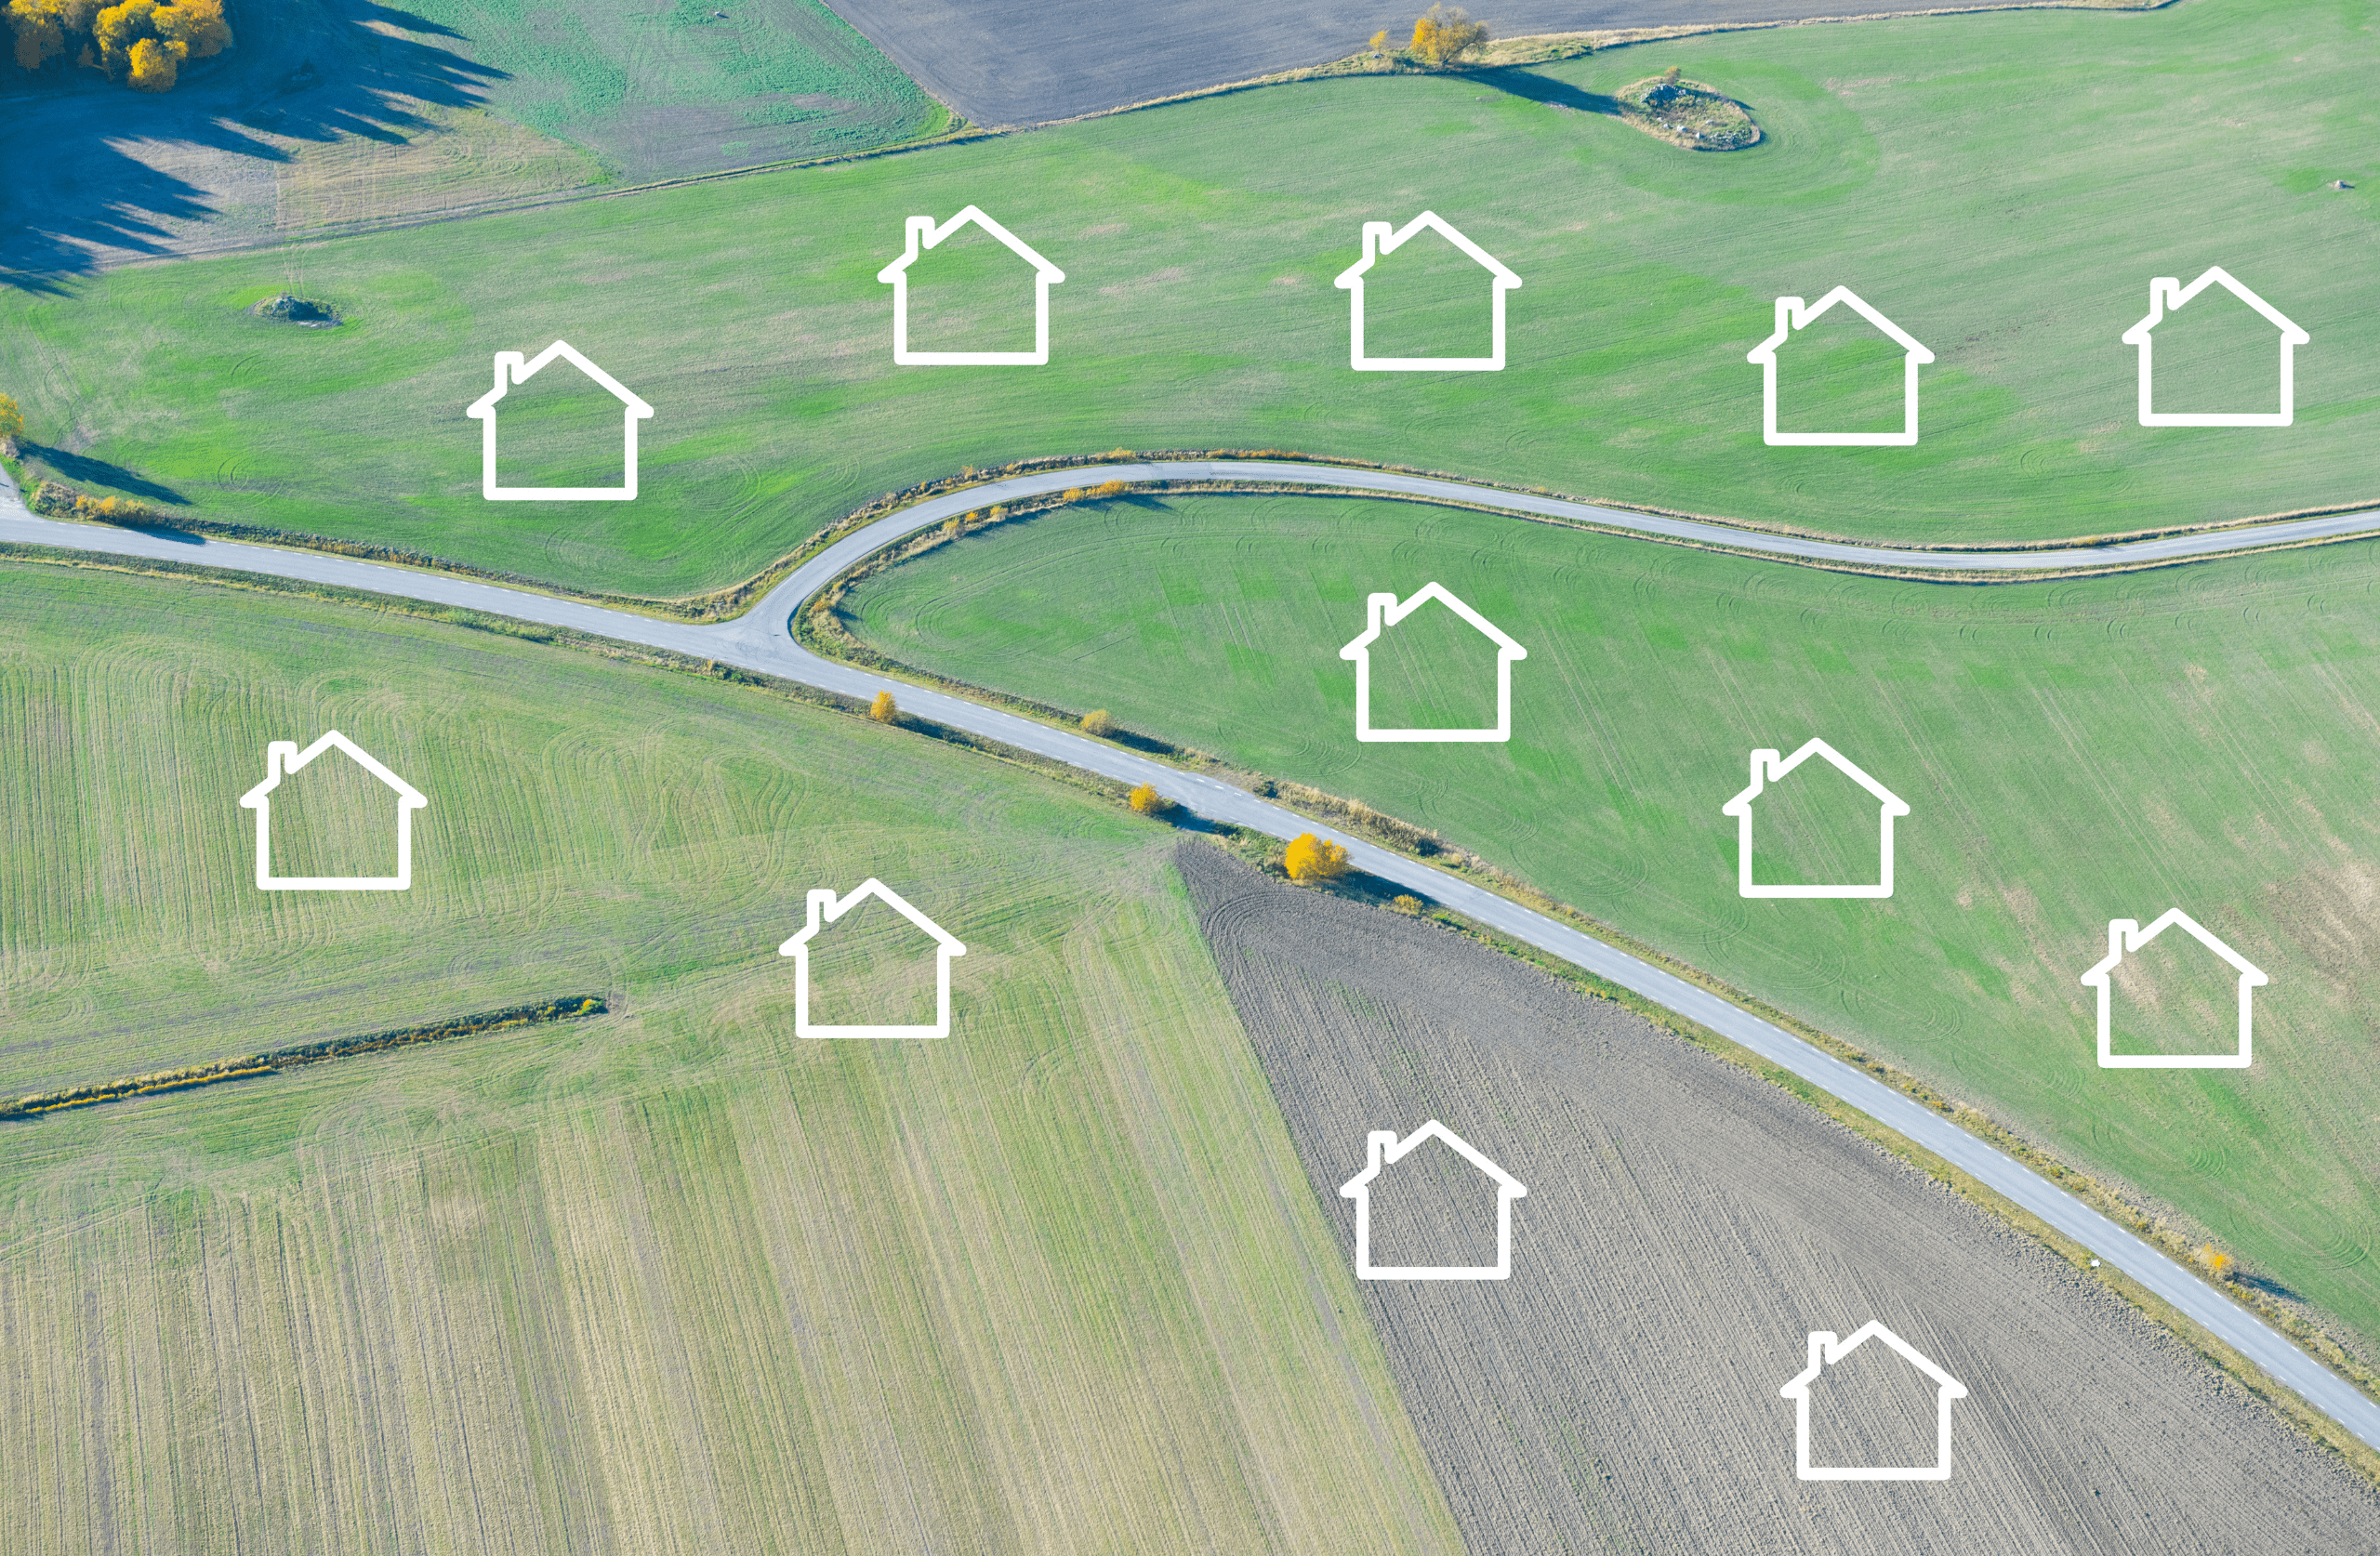 house icon outlines on an image of open fields